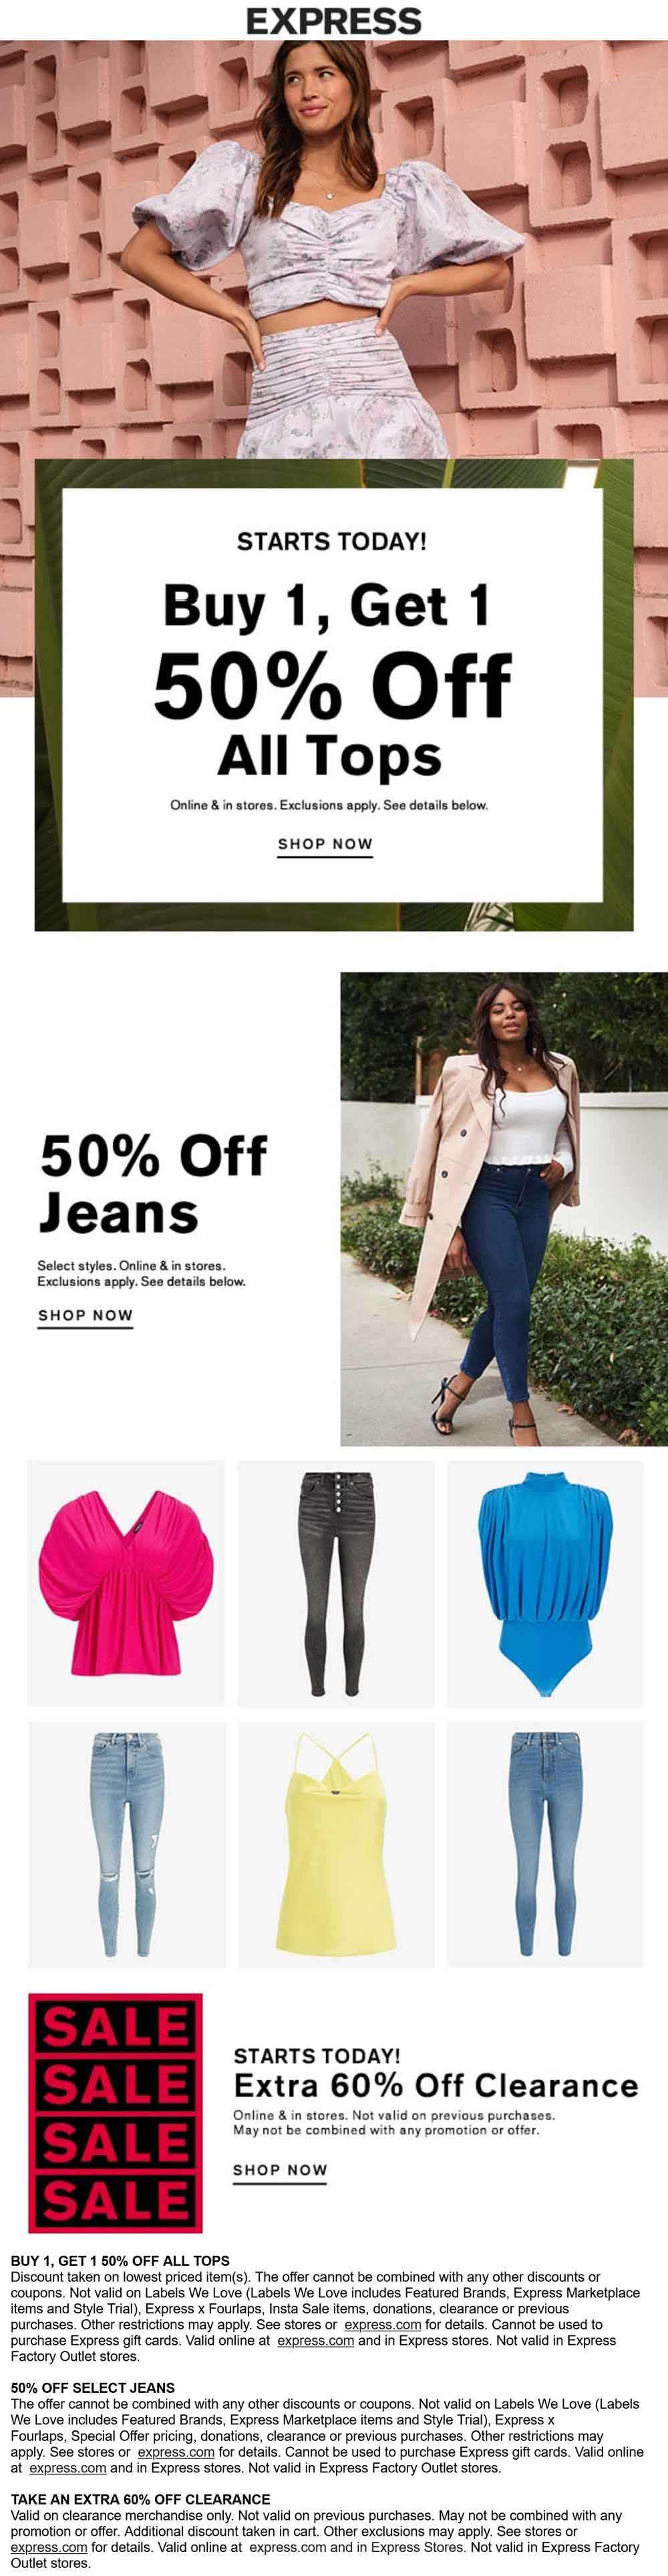 Express stores Coupon  50% off jeans & second top 50% off at Express, ditto online #express 